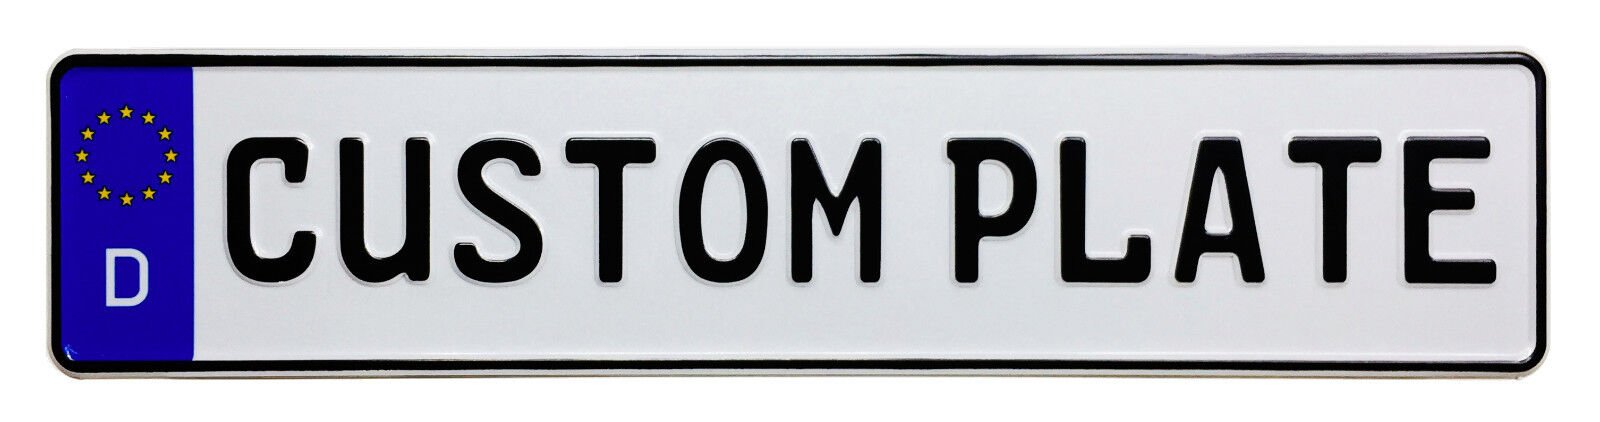 Custom German License Plate with Small Font - Fits 11 characters